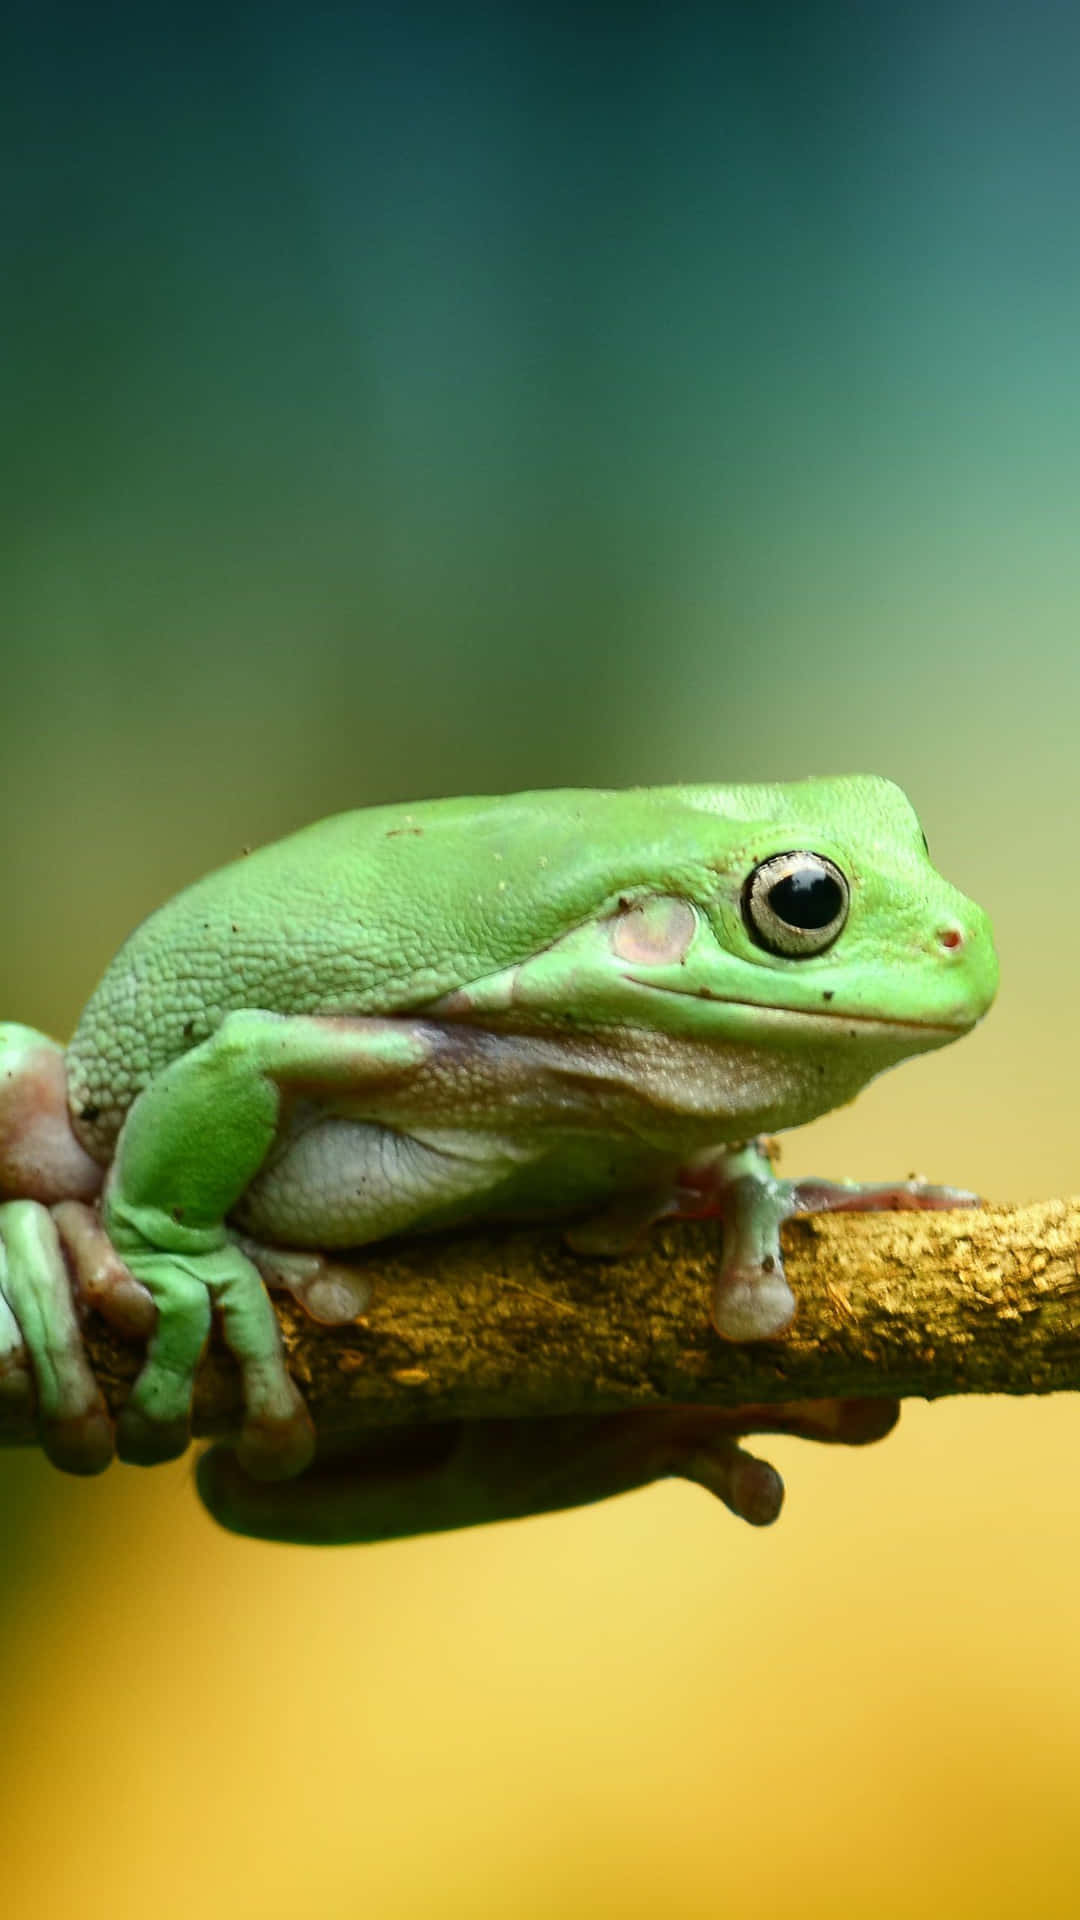 100+] Cute Frog Backgrounds